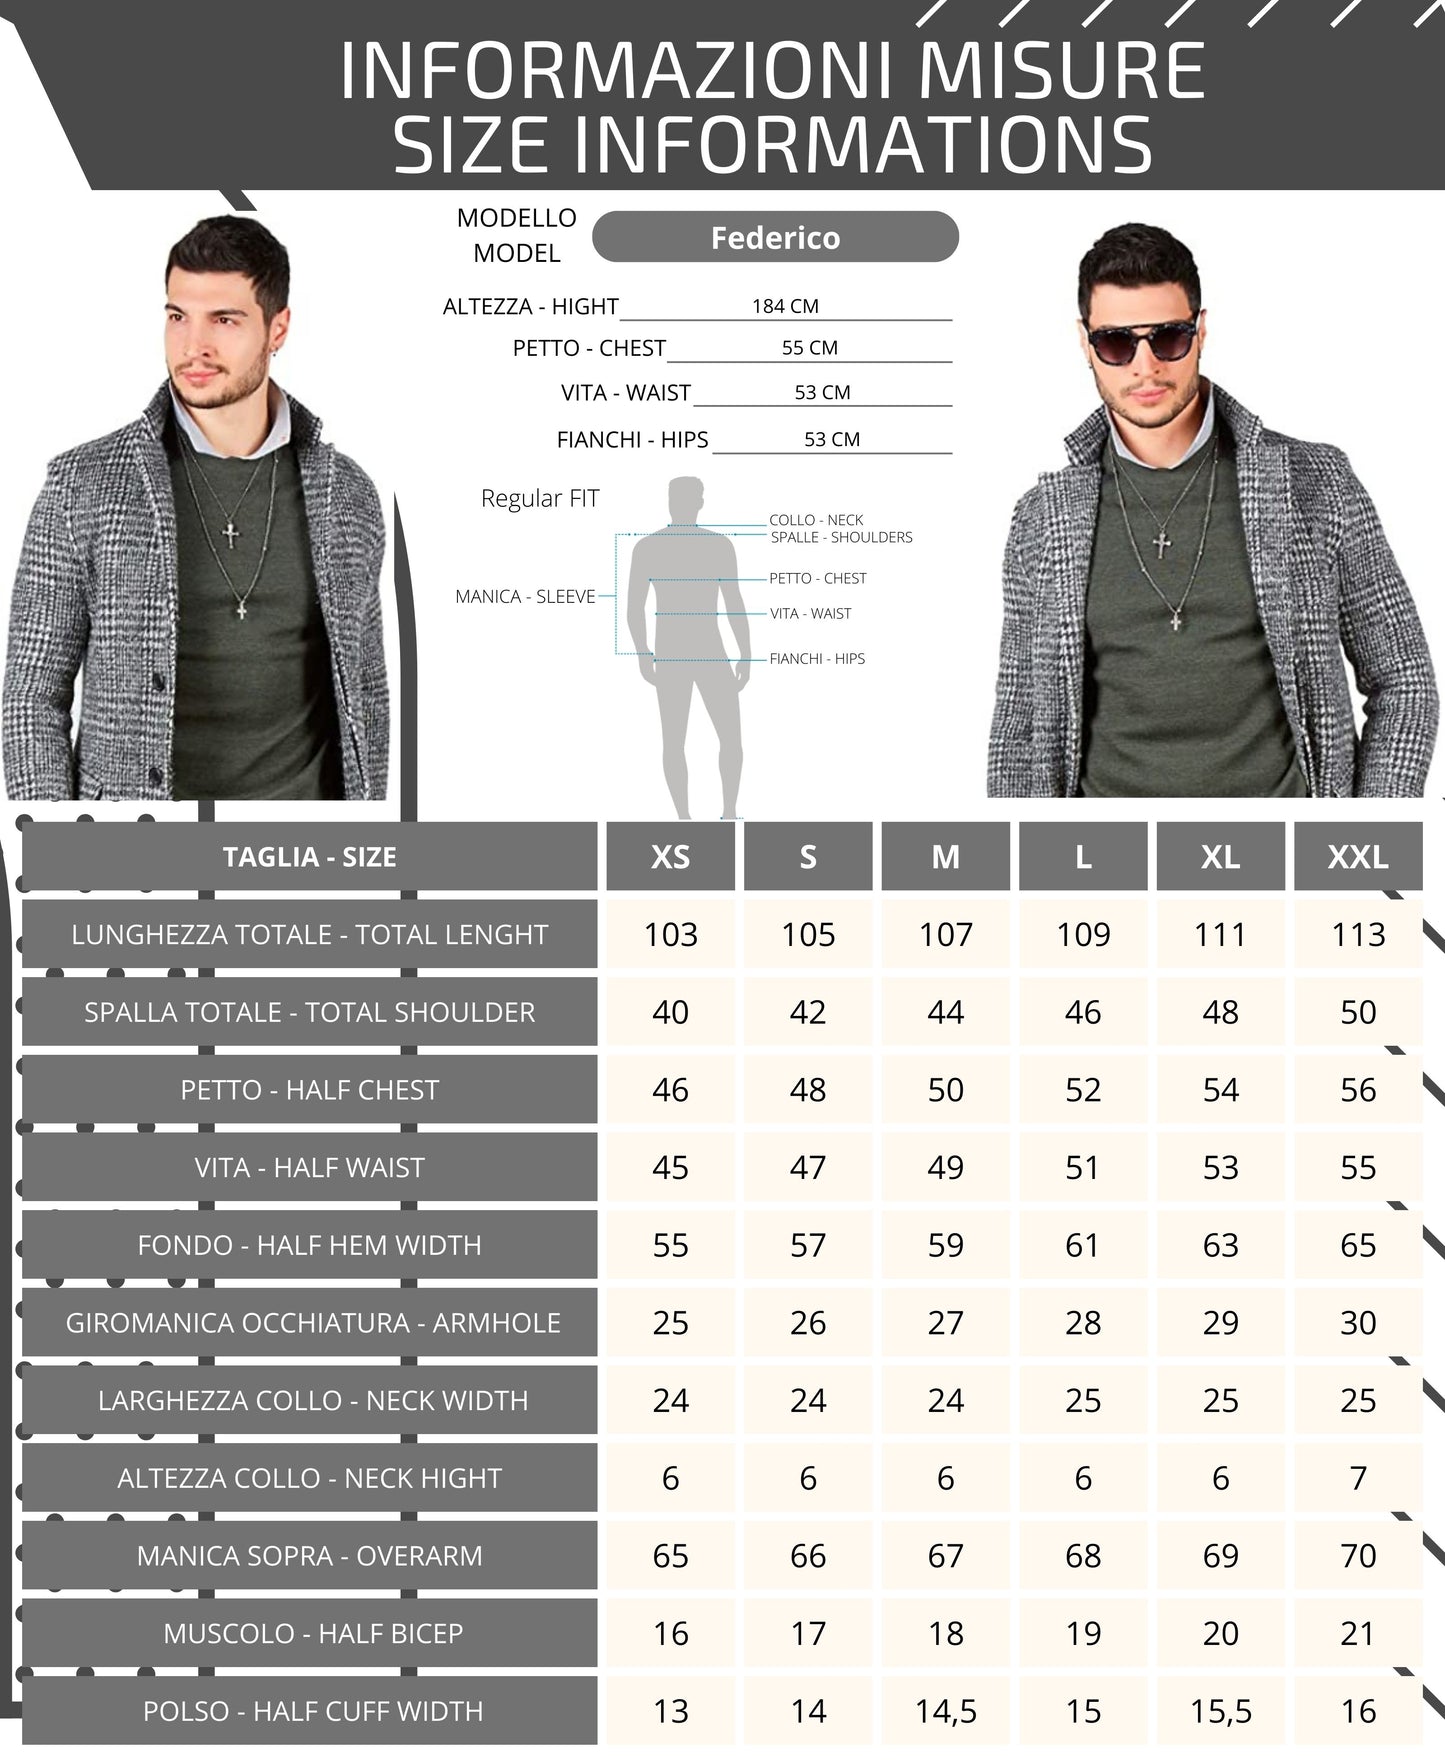 Manteau - Homme, Automne/Hiver - 100% Laine Extrafine - 100% Made in Italy | Brunella Gori